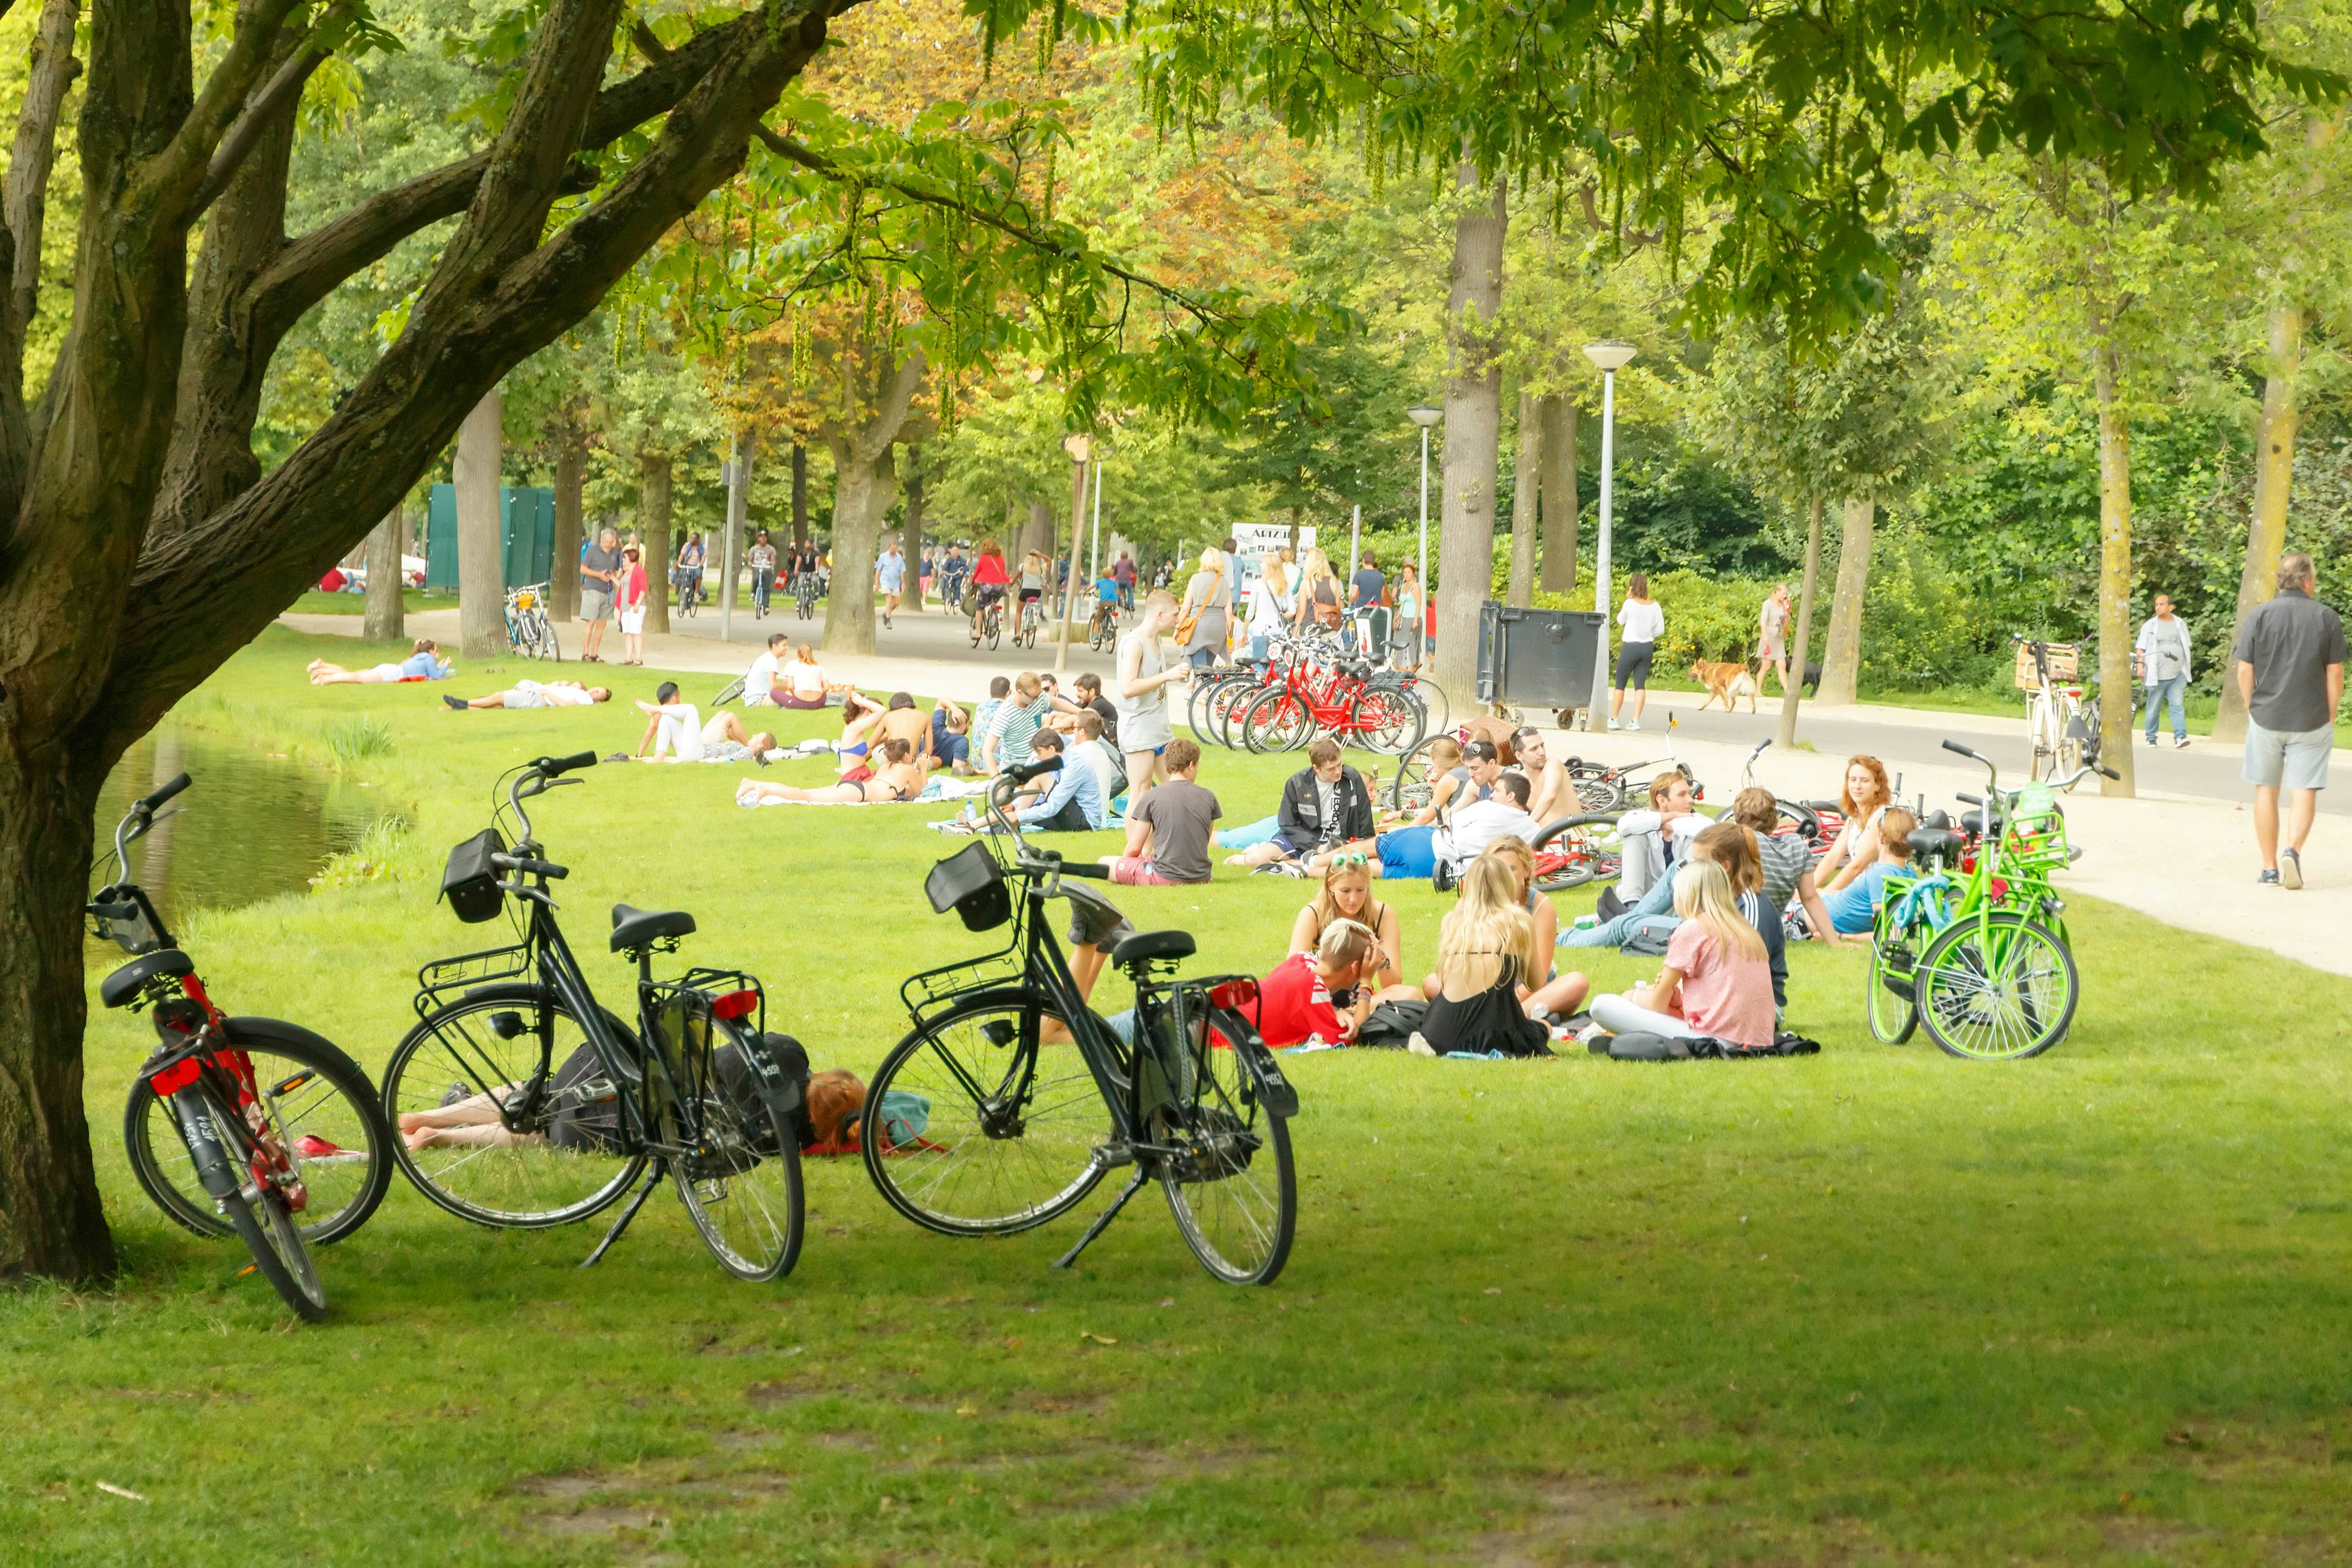 Students sitting on the grass in a park in the Netherlands